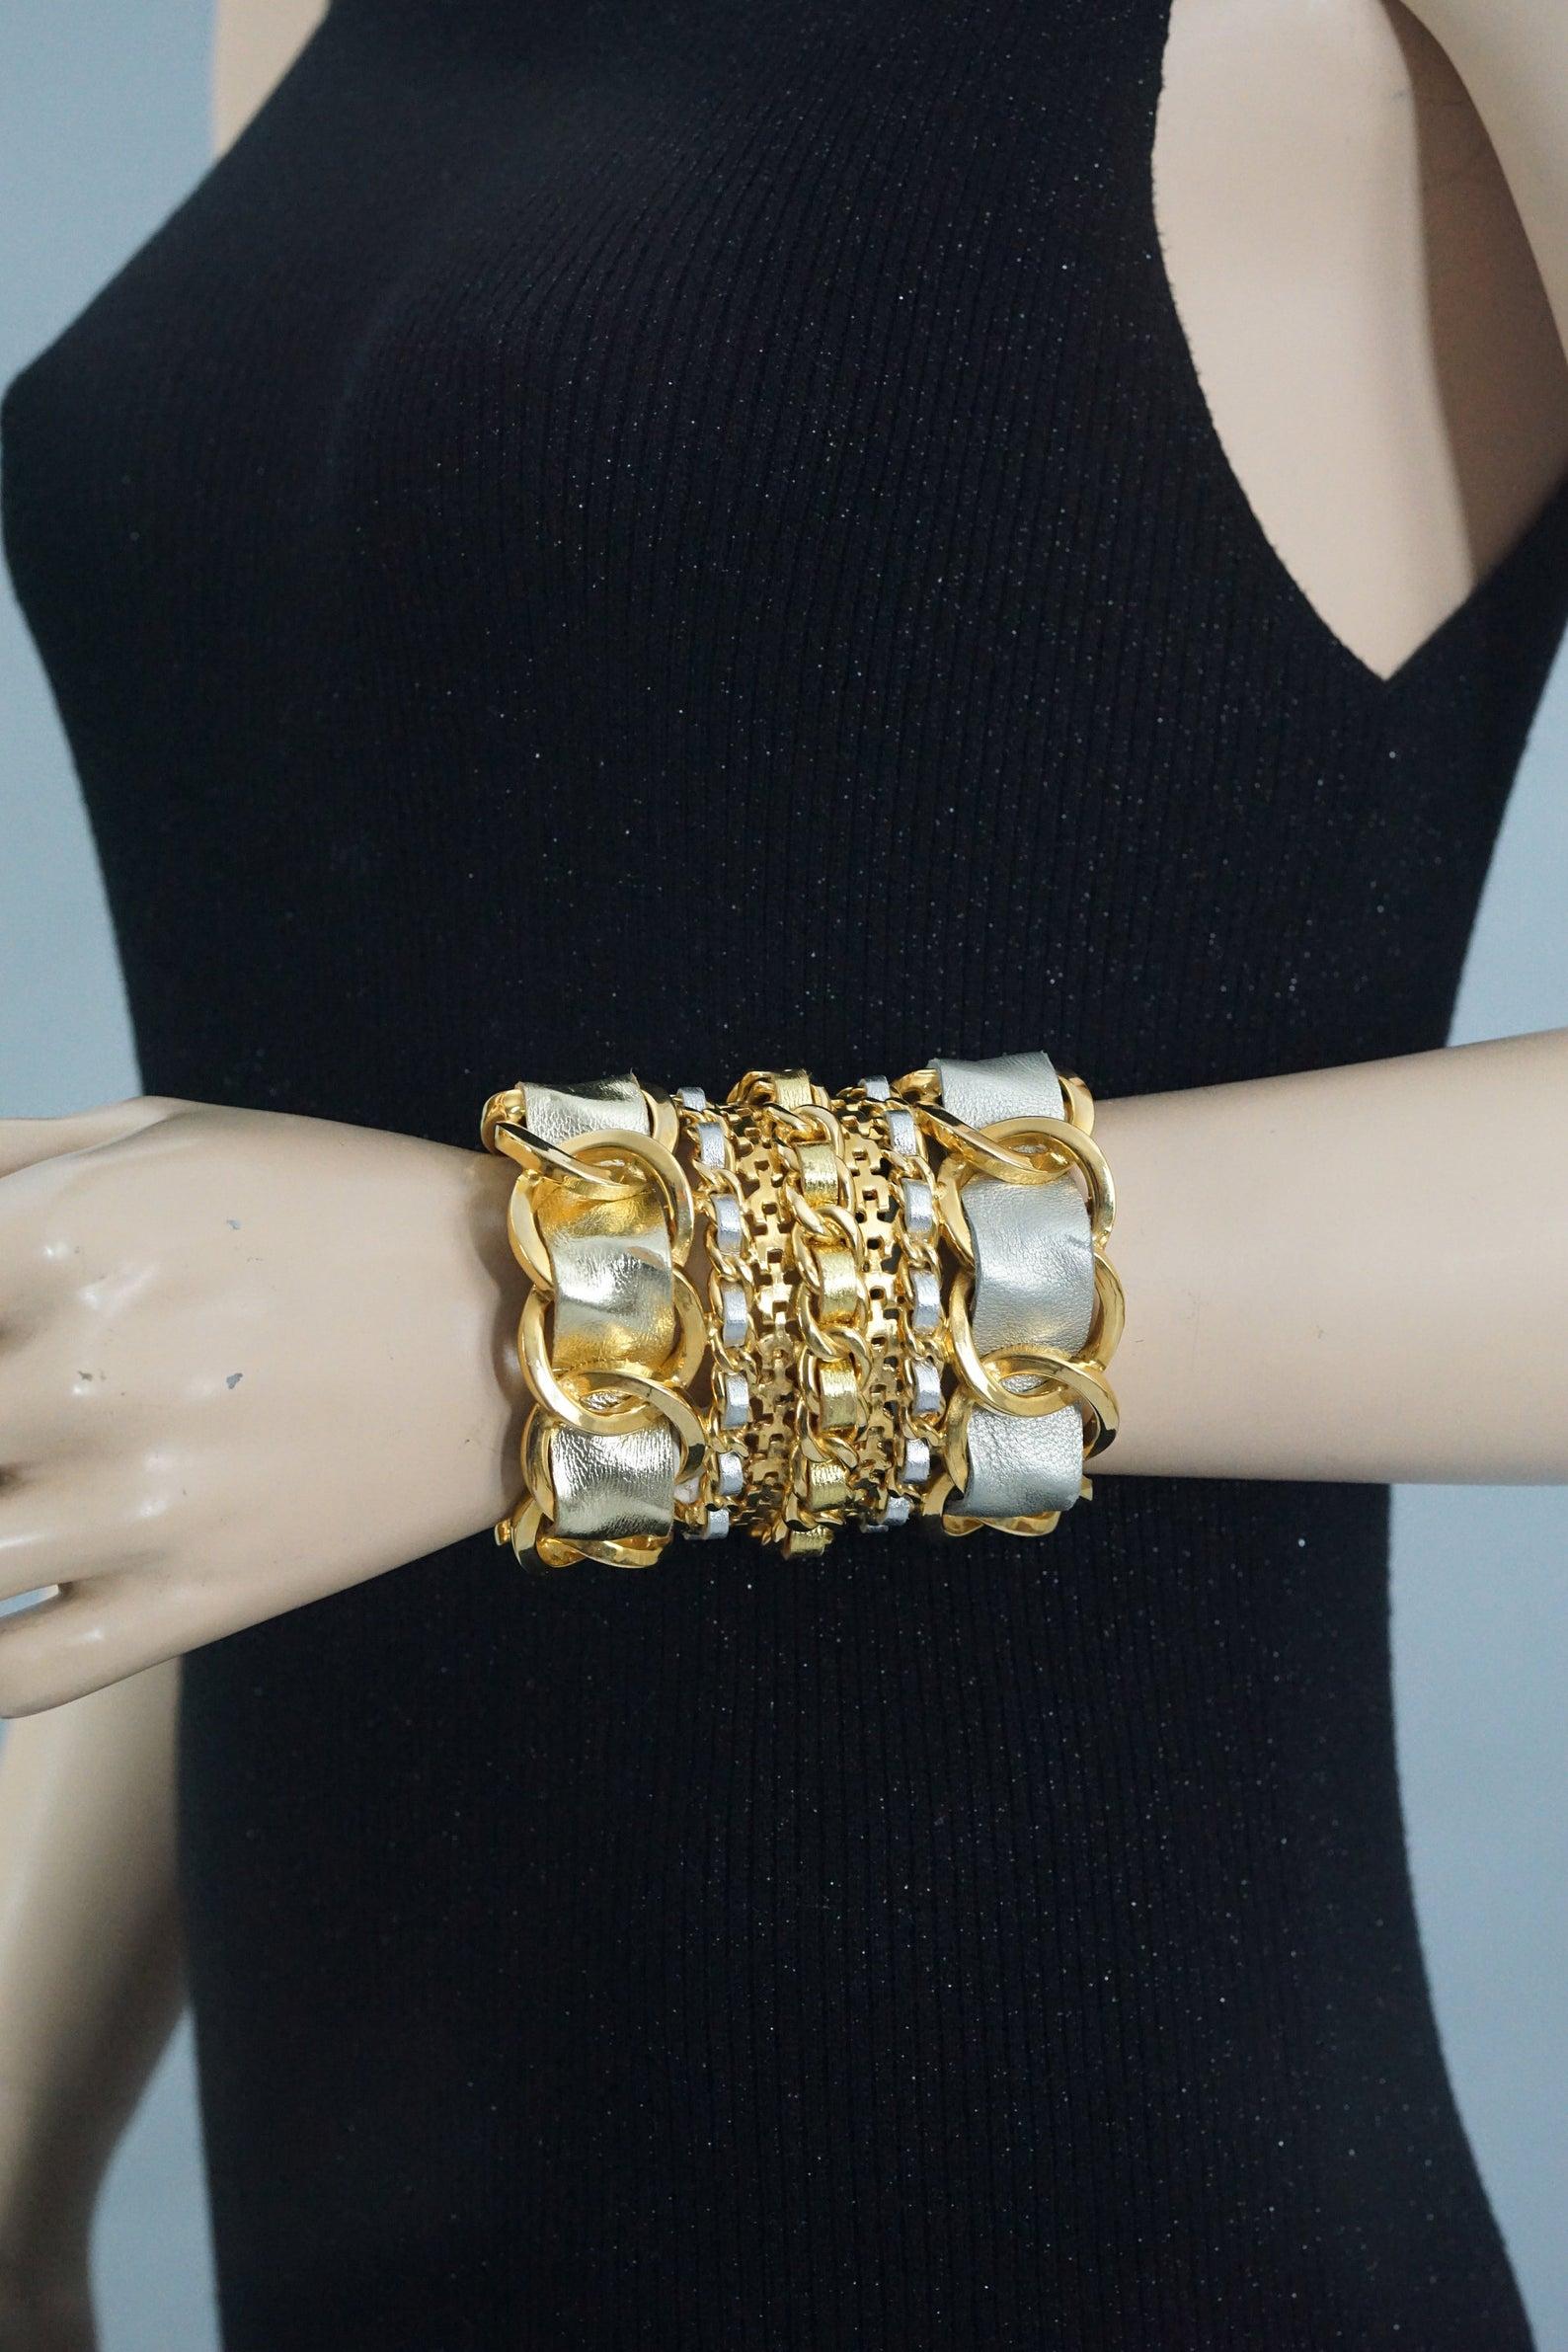 Features:
- 100% Authentic CHANEL.
- Massive chain cuff bracelet with woven gold and silver leather.
- Rigid wide cuff.
- Gold tone.
- Signed with CHANEL 2 CC 6 Made in France.
- Will fit small to medium wrists.
- Excellent vintage